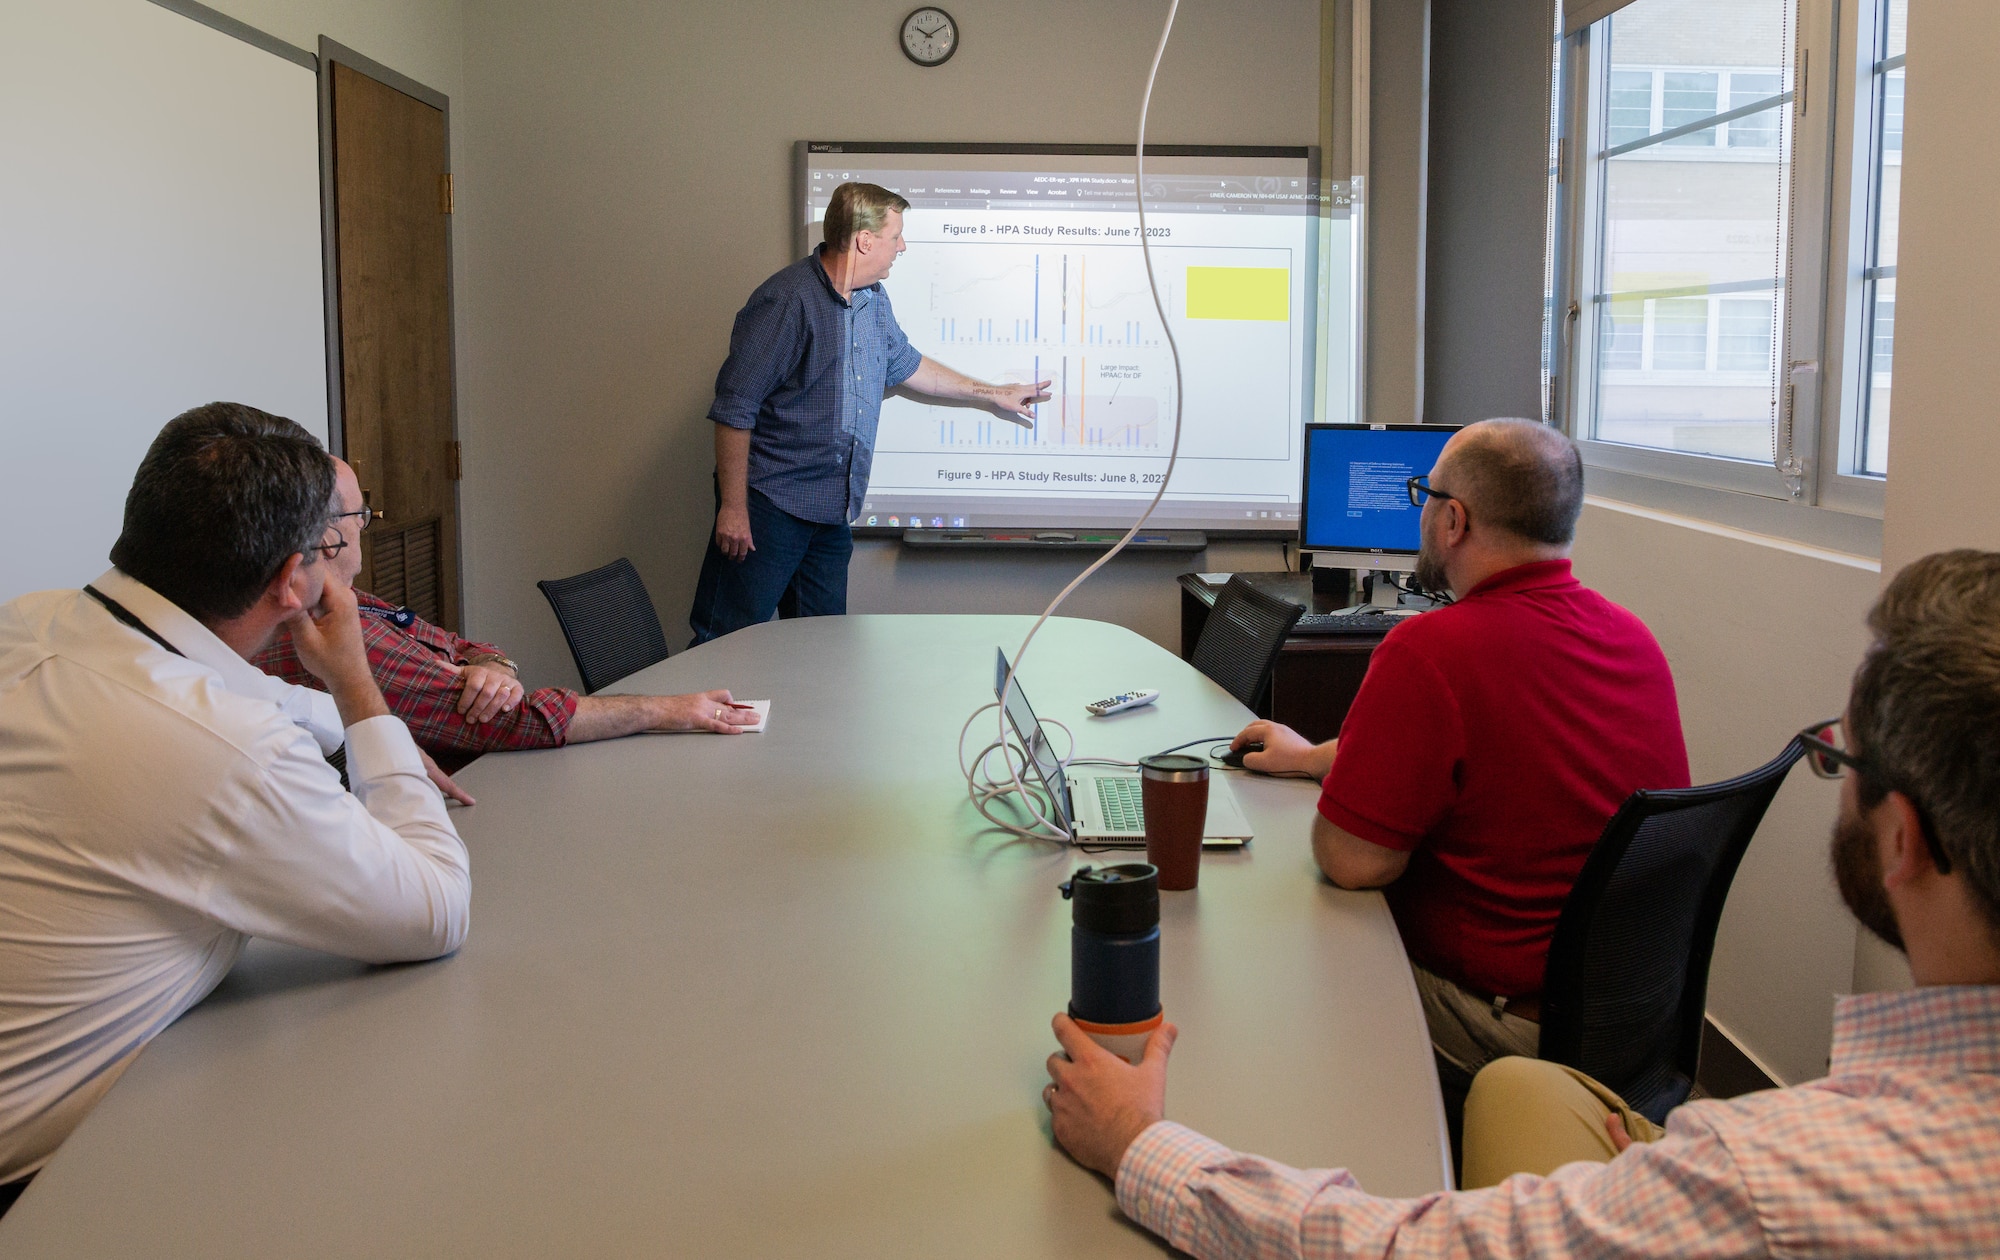 Greg Sterling, an aerospace engineer with Arnold Engineering Development Complex (AEDC), reviews some of his findings in his work on the Scenario Optimizer for AEDC Resources (SOAR) with fellow AEDC team members, May 11, 2022, at Arnold Air Force Base, Tenn. SOAR is a software application for comparing different test schedules based on test user requirements to identify high-pressure air restrictions or limitations. (U.S. Air Force photo by Jill Pickett) (This image has been altered by obscuring a white board and portion of a screen.)